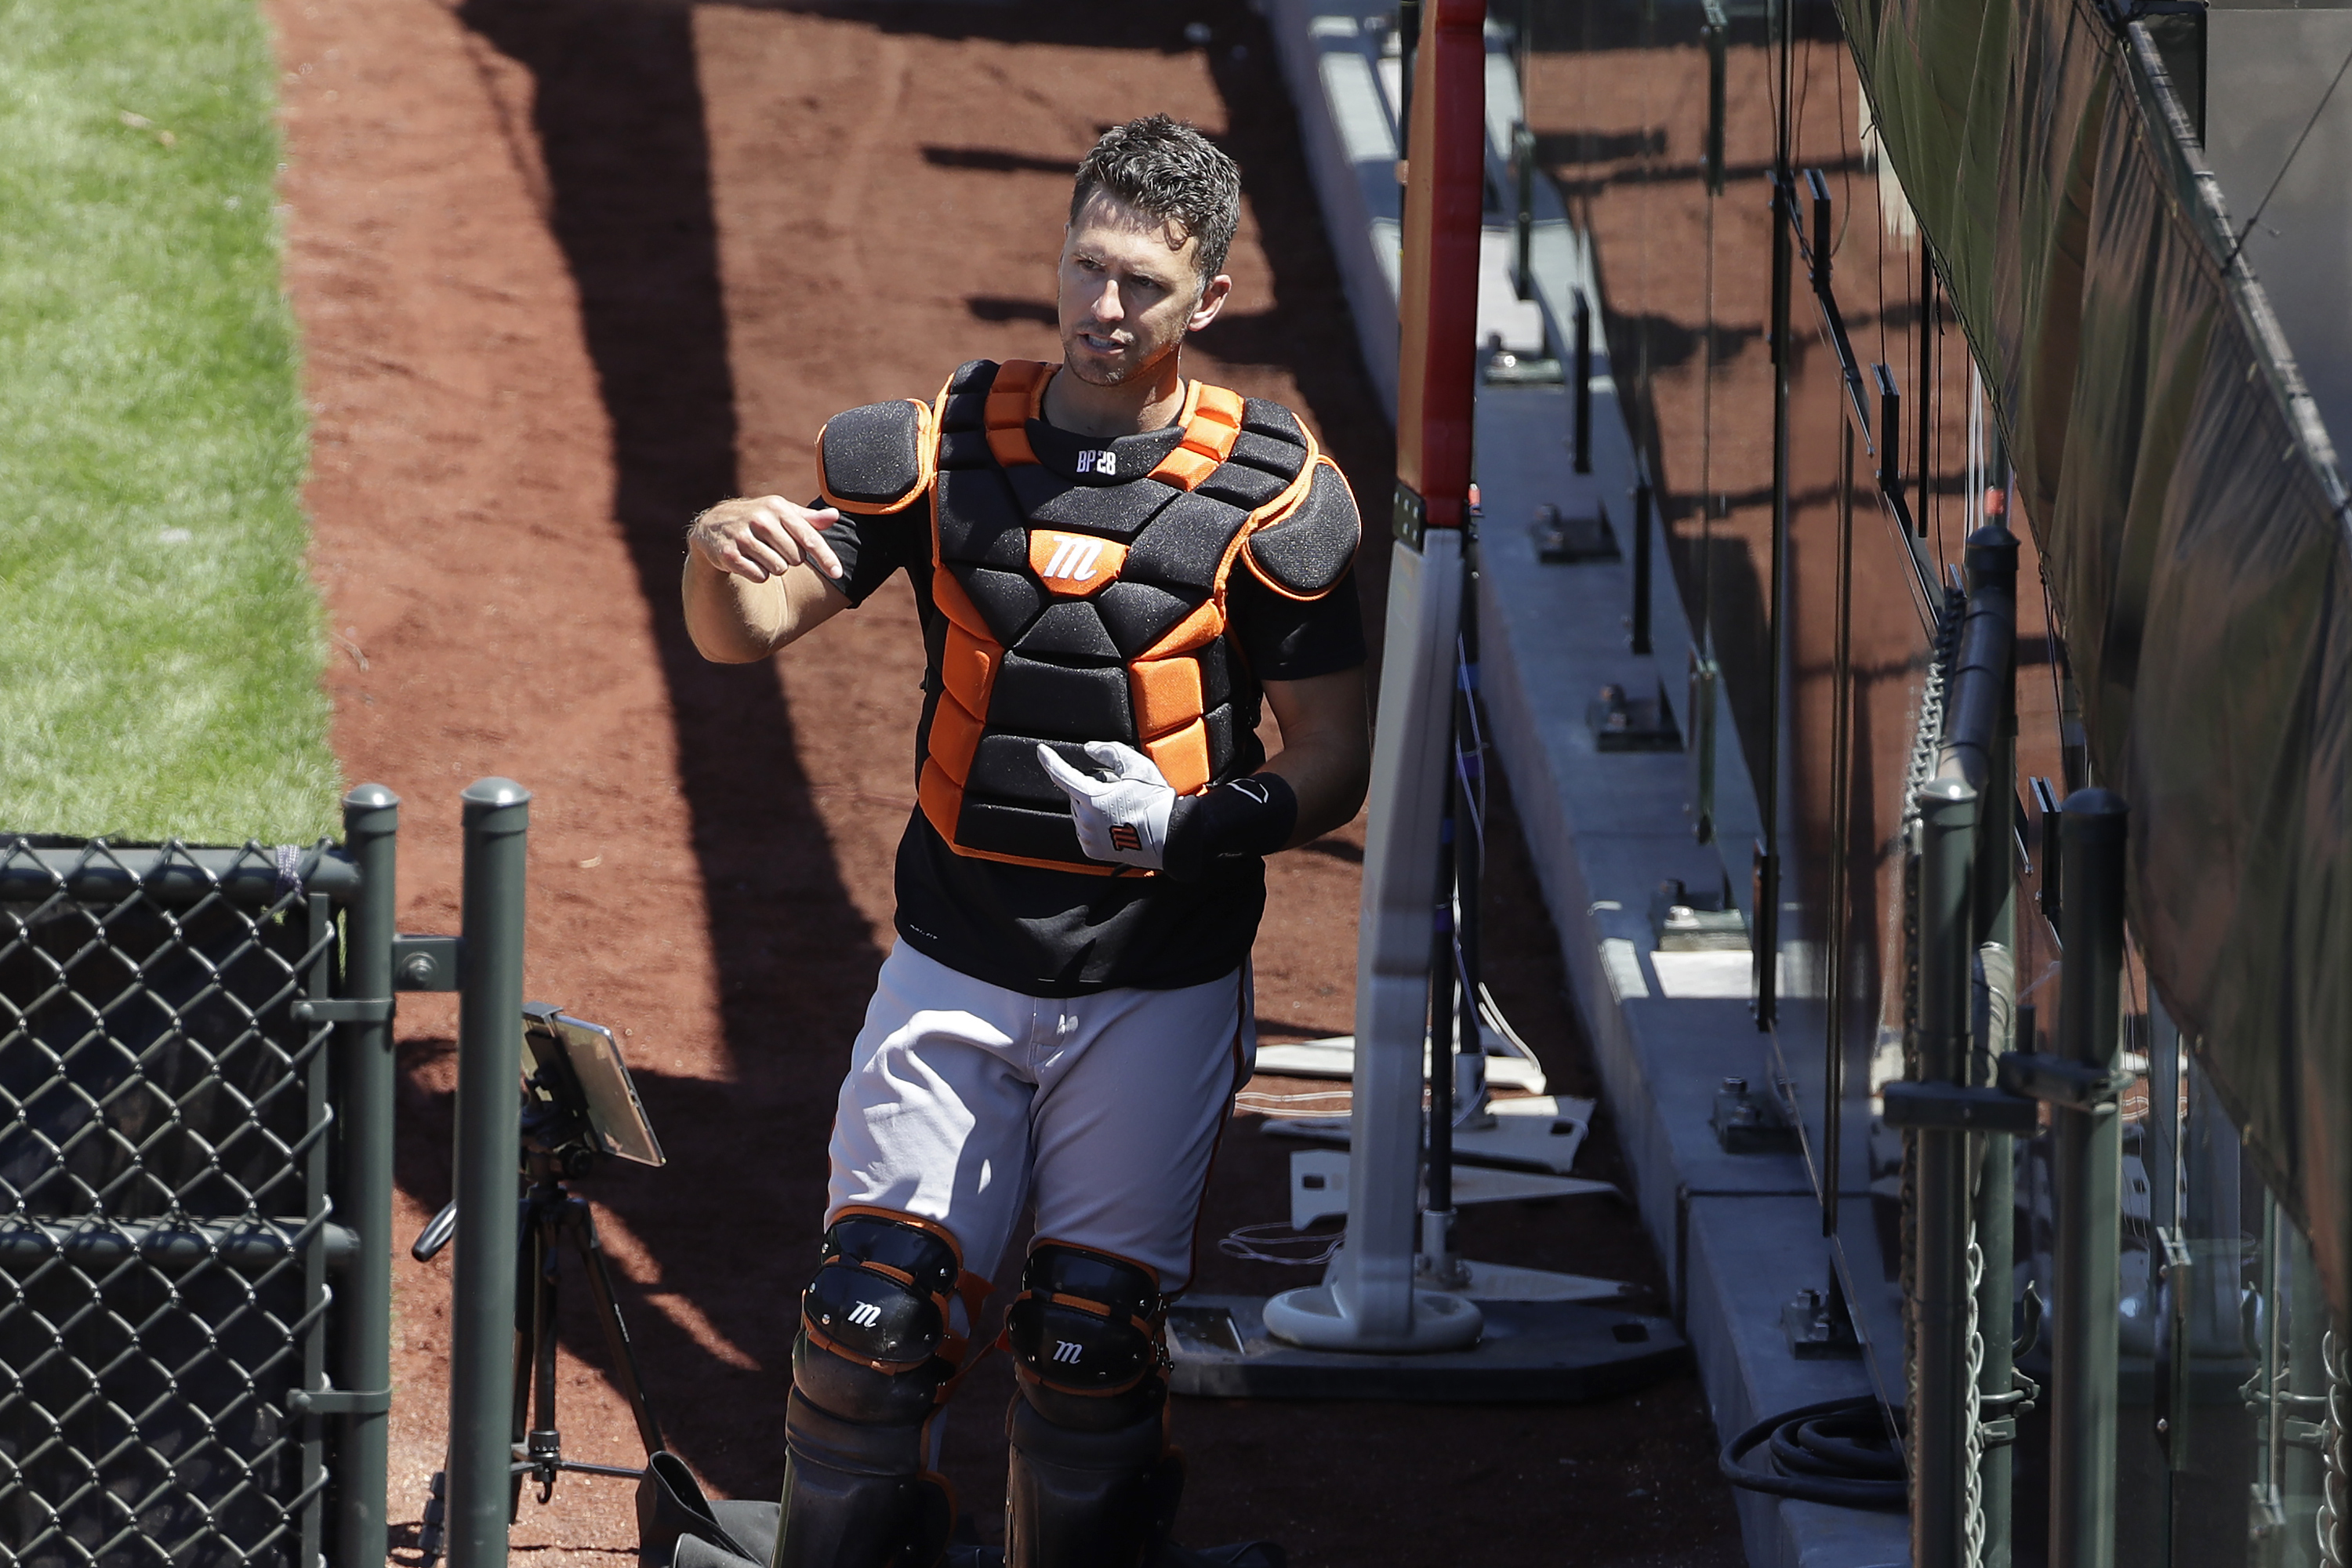 Giants Star Catcher Buster Posey To Sit Out Season Over